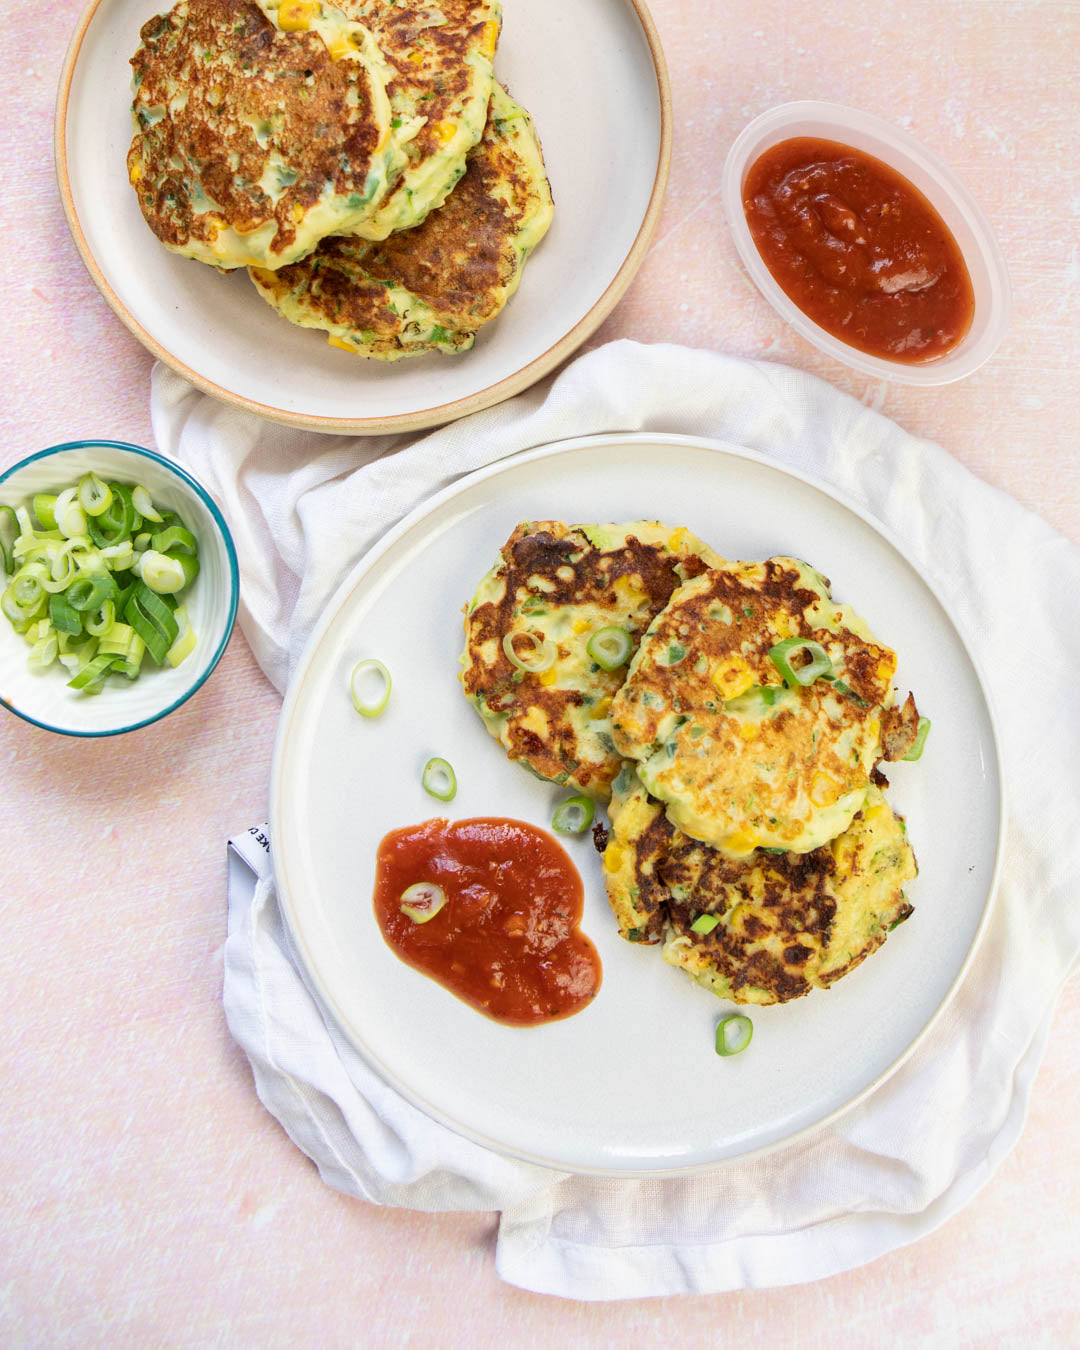 Sweetcorn and Courgette Fritters